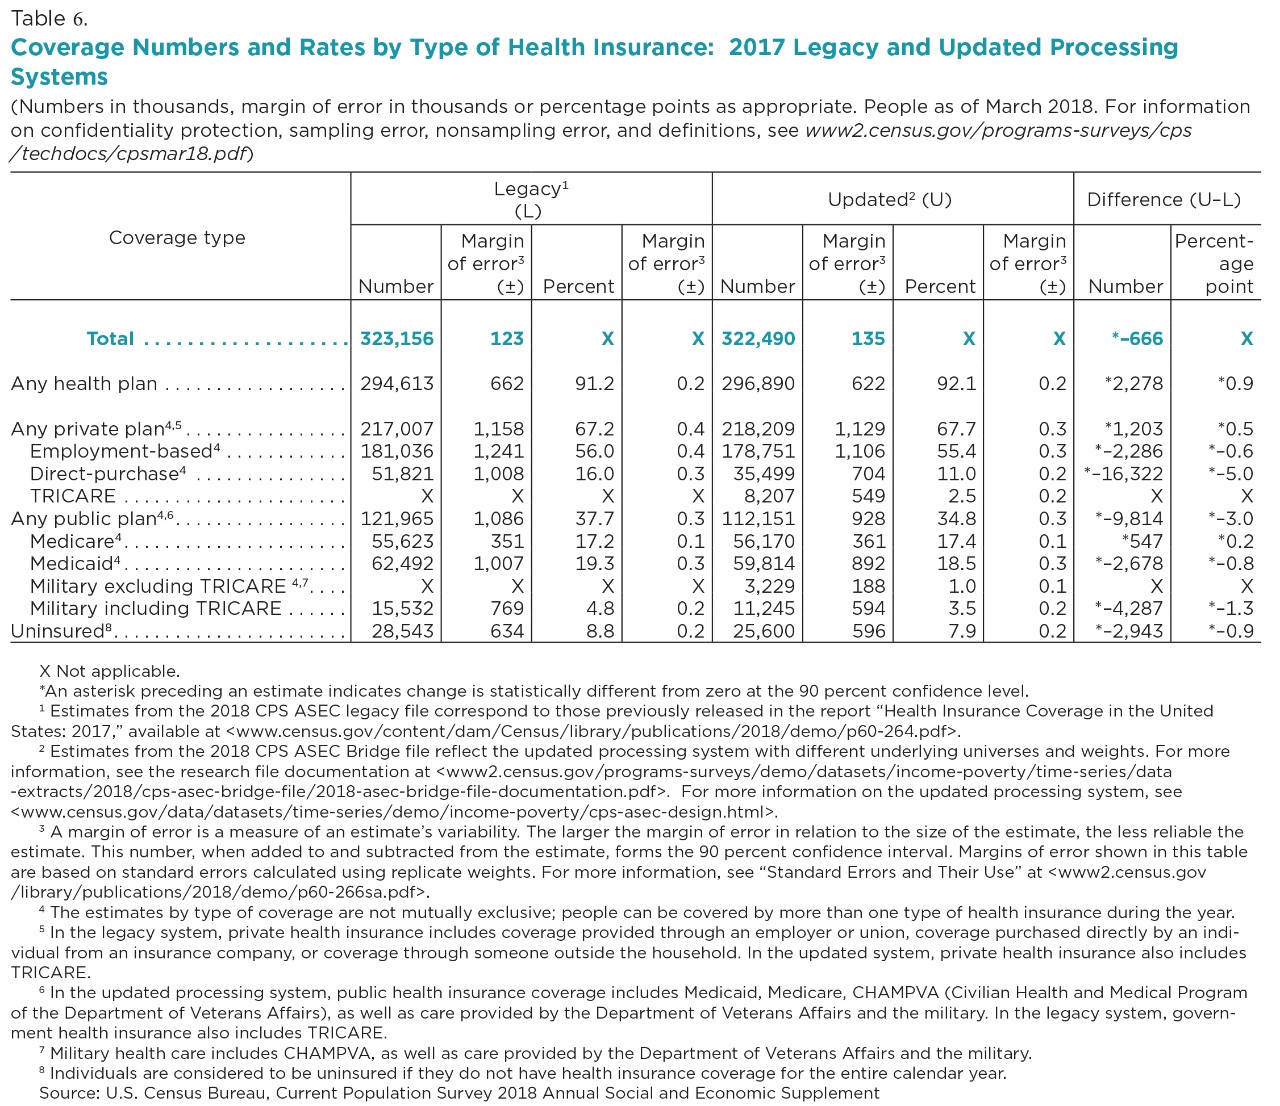 Table 6. Coverage Numbers and Rates by Type of Health Insurance: 2017 Legacy and Updated Processing Systems